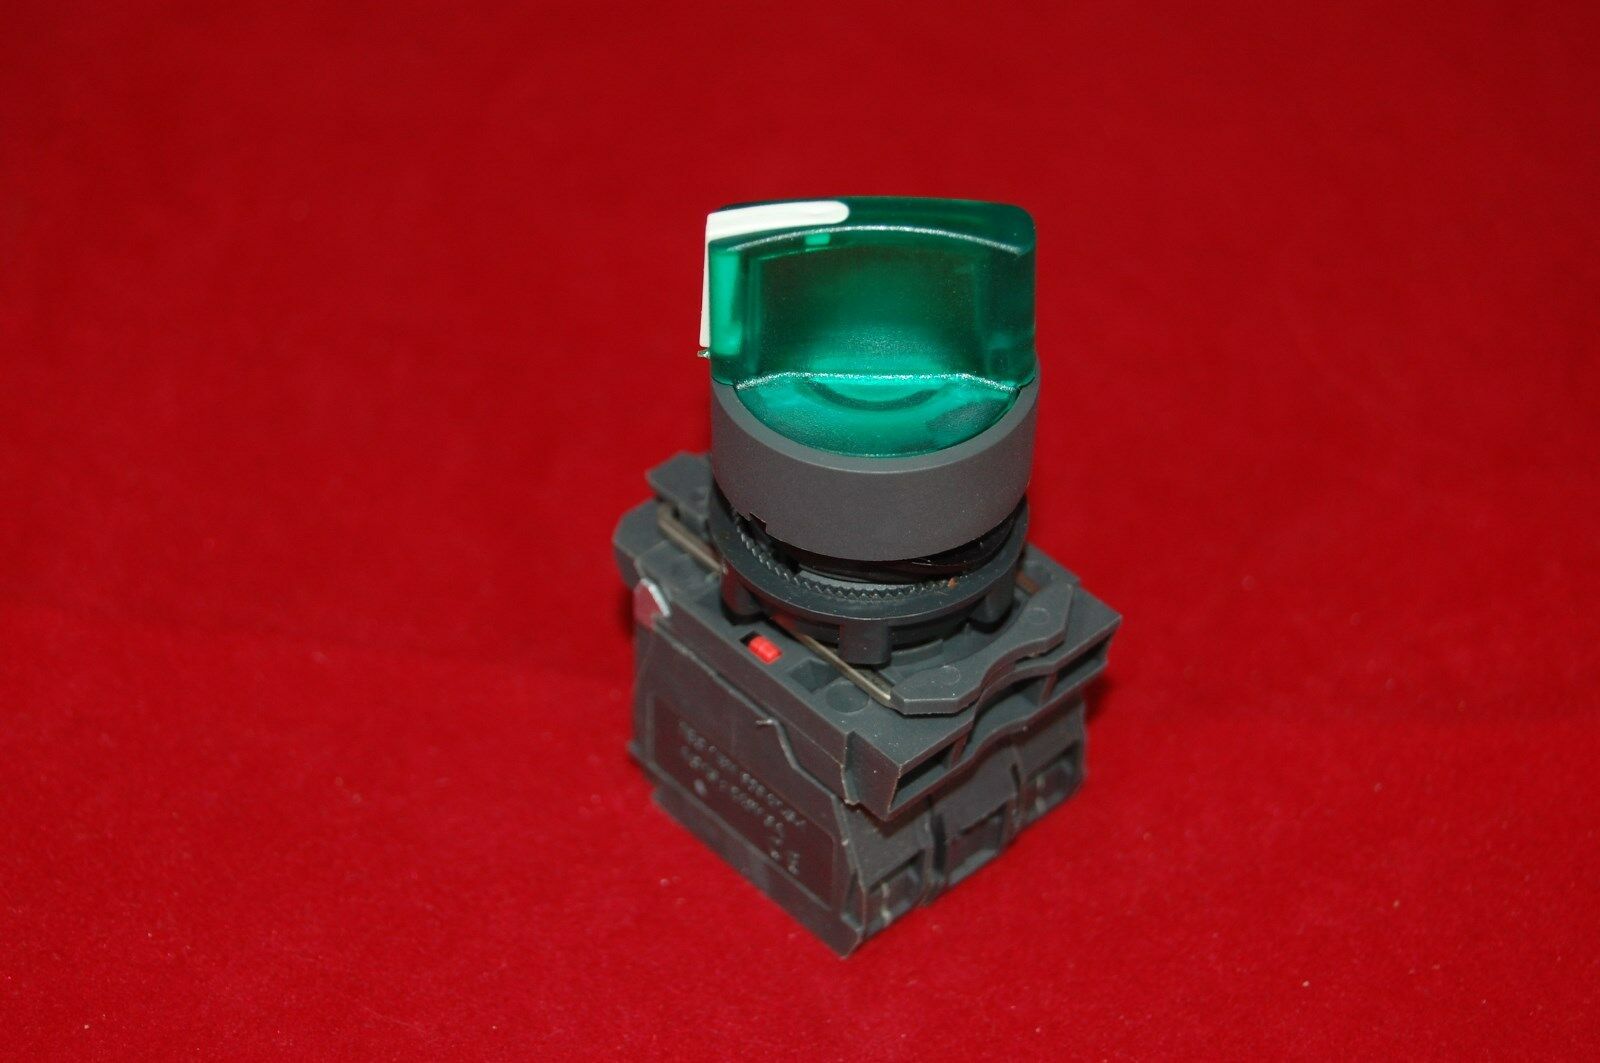 22mm ILLUMINATED Selector switch 3 Position Fits Green XB5AK153J5 12V Momentary